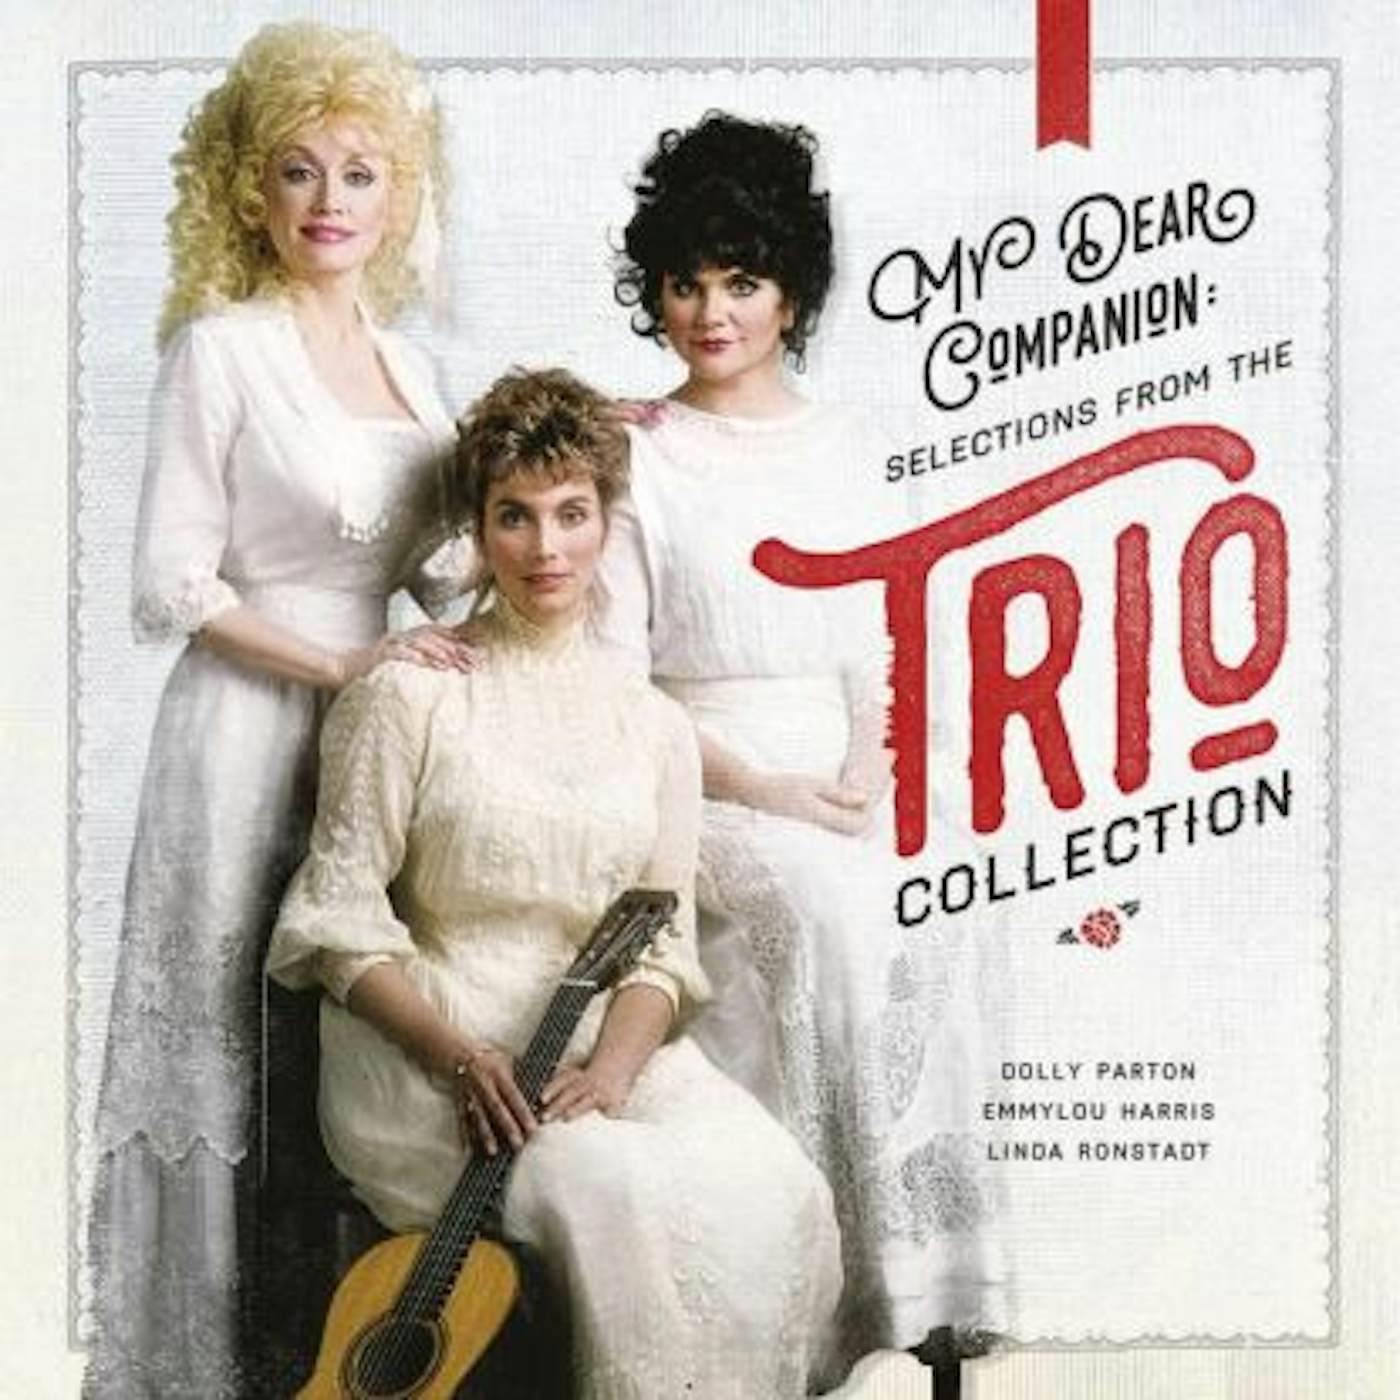 Emmylou Harris, Dolly Parton & Linda Ronstadt My Dear Companion: Selections From The Trio Collection